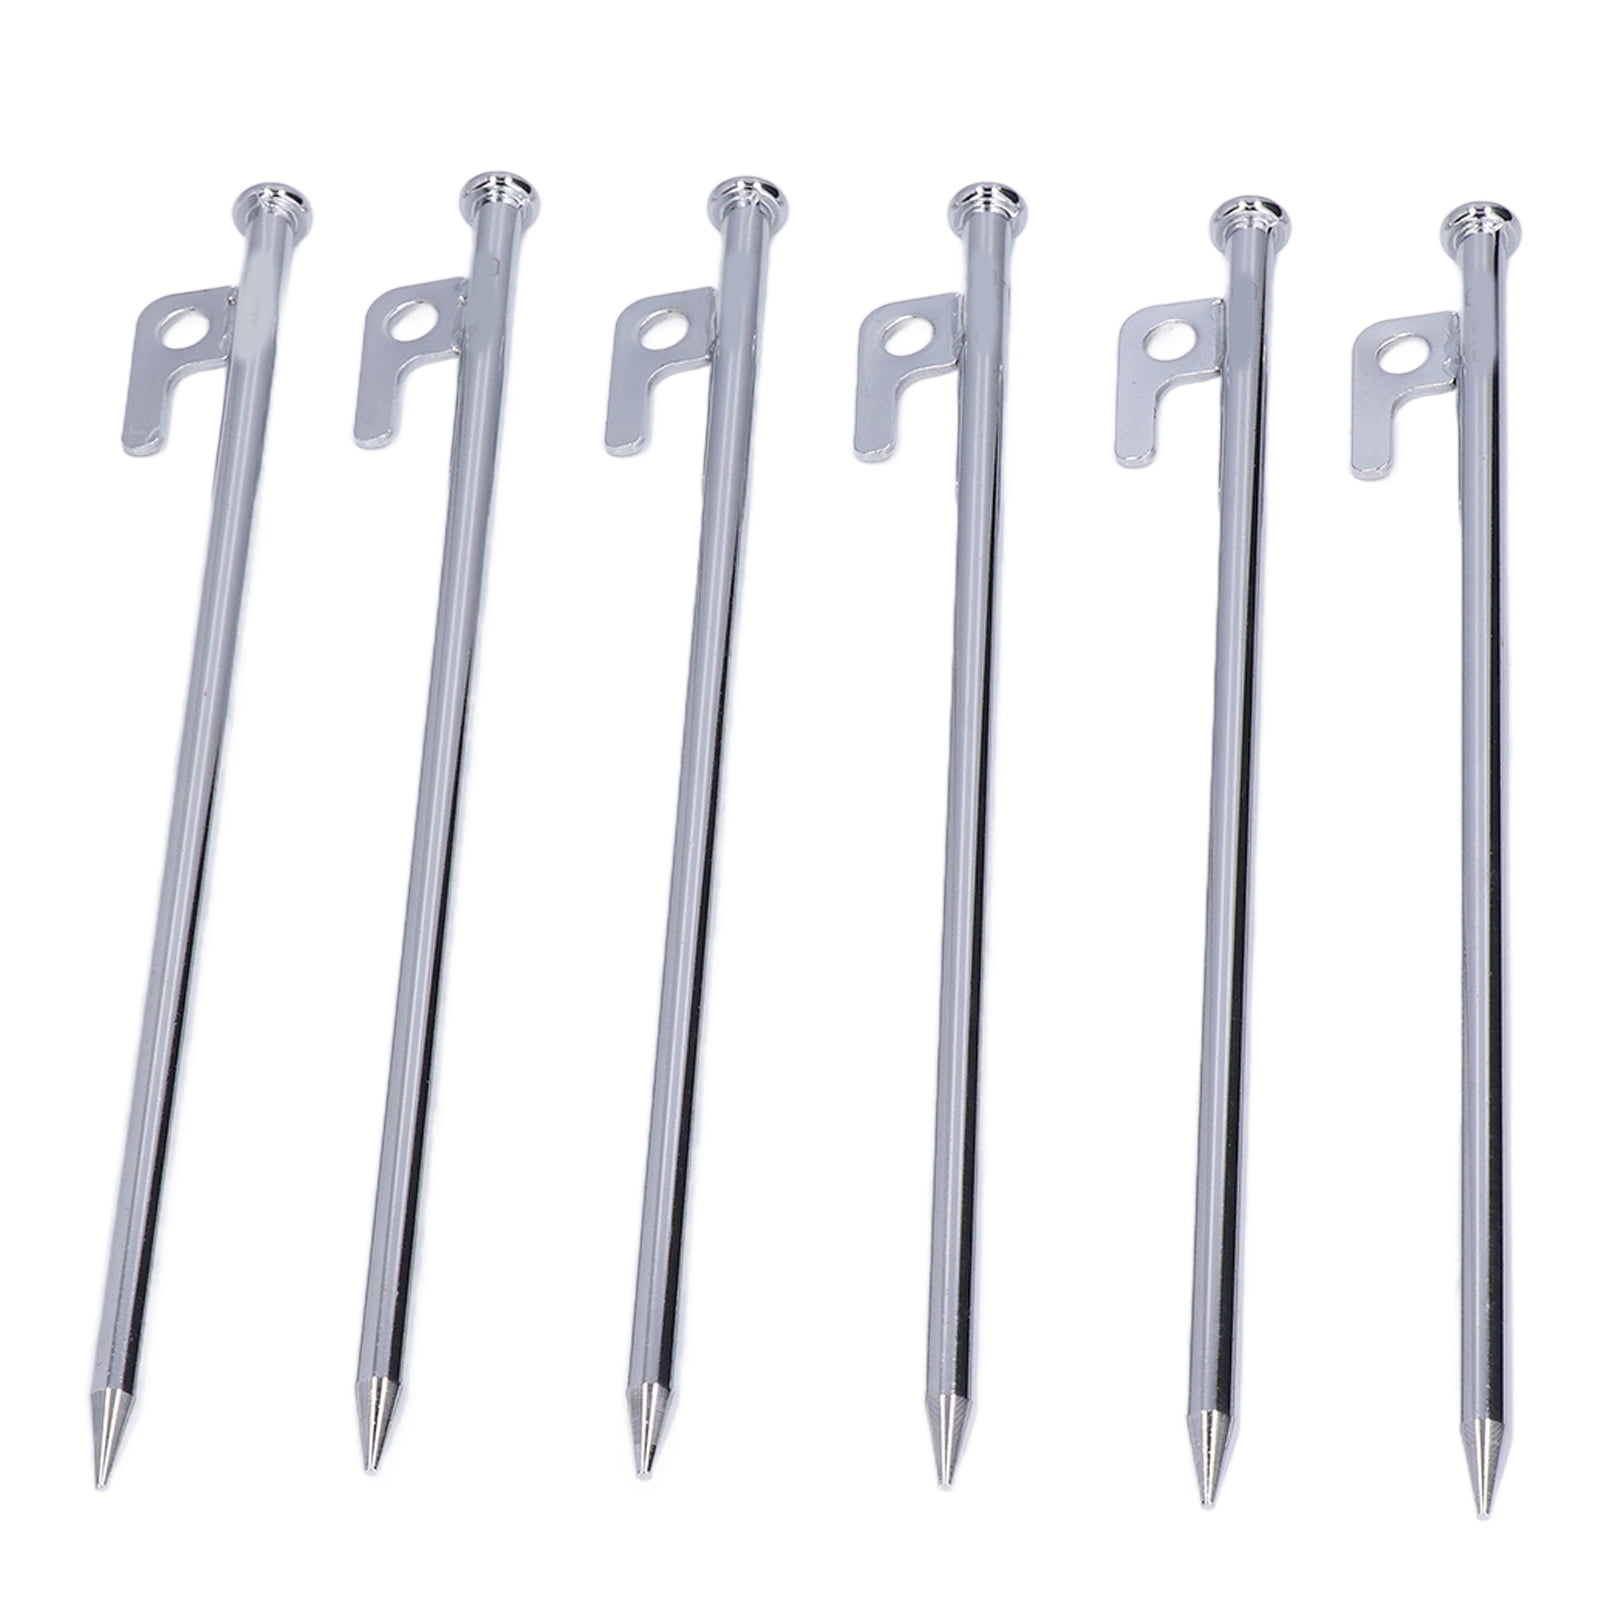 Pegs Camping 2 New Sets of 4 Coleman 9-in Heavy Duty Aluminum Tent Stakes 